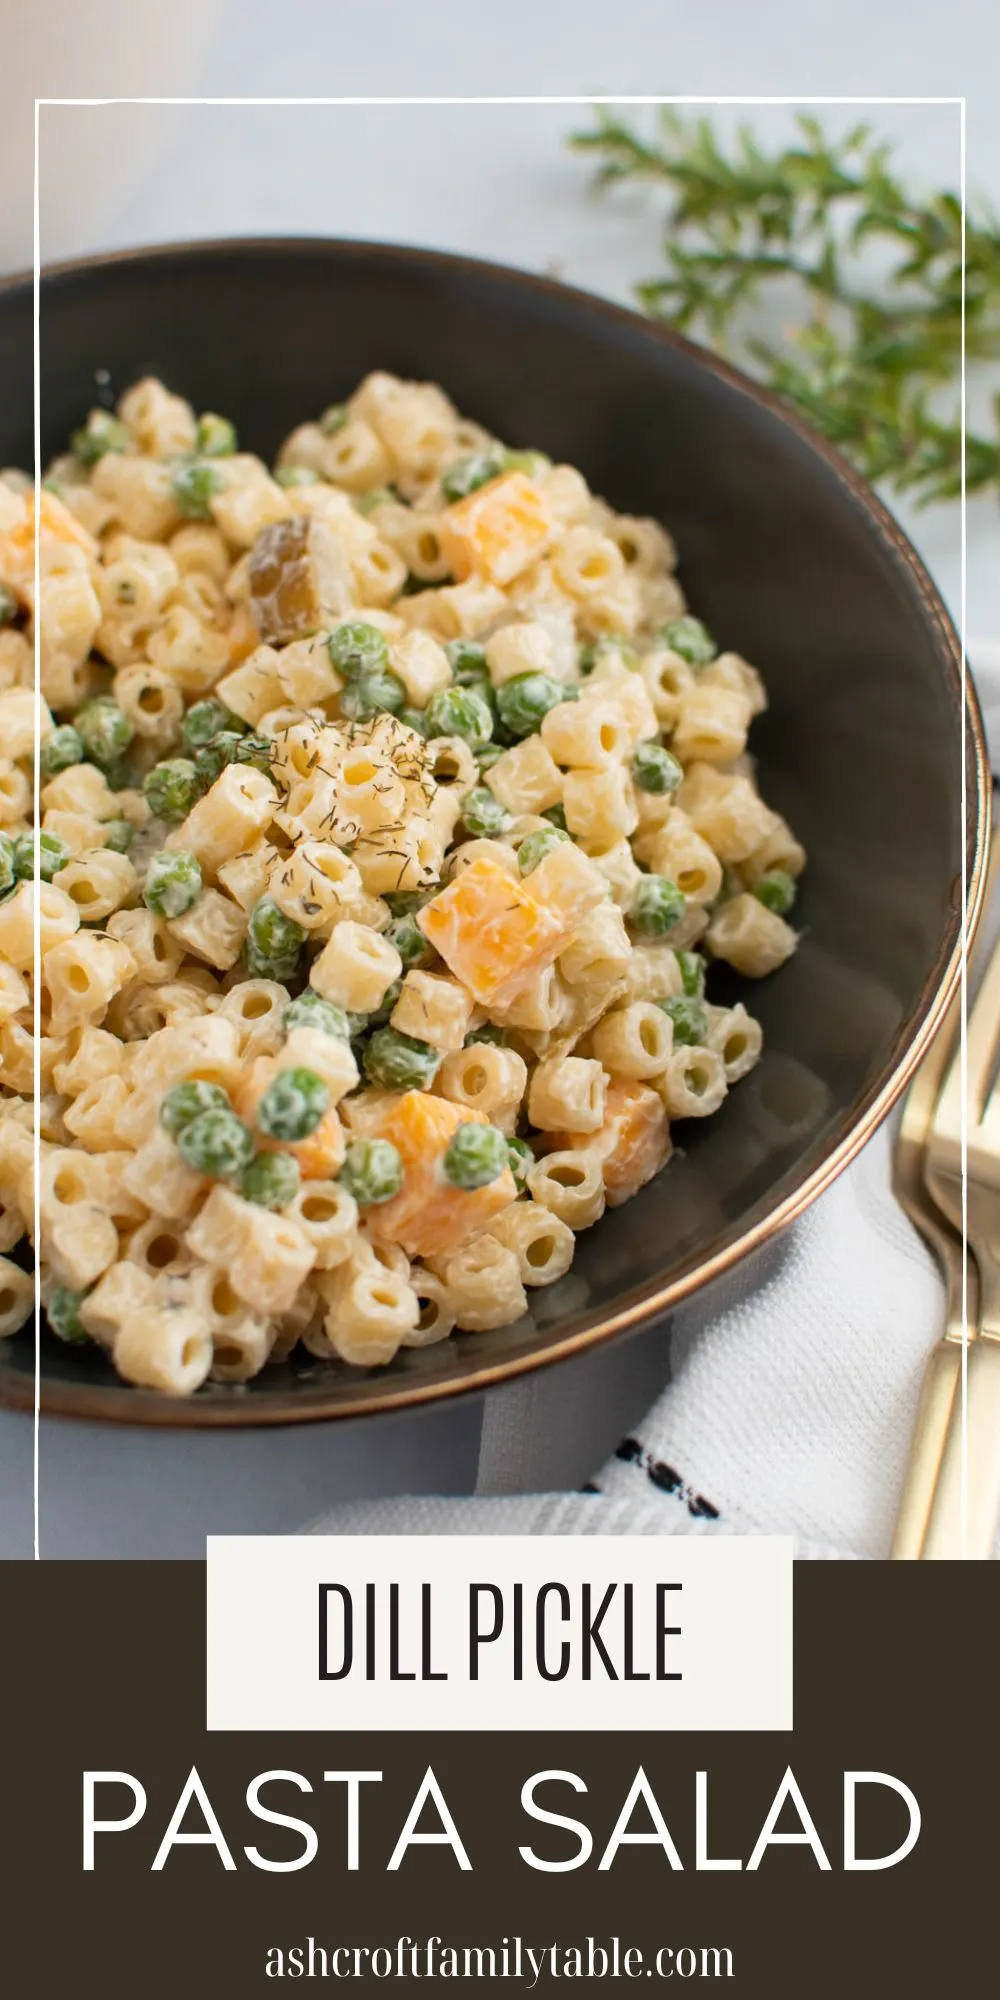 Pinterest graphic with text and photo of bowl of dill pickle pasta salad.